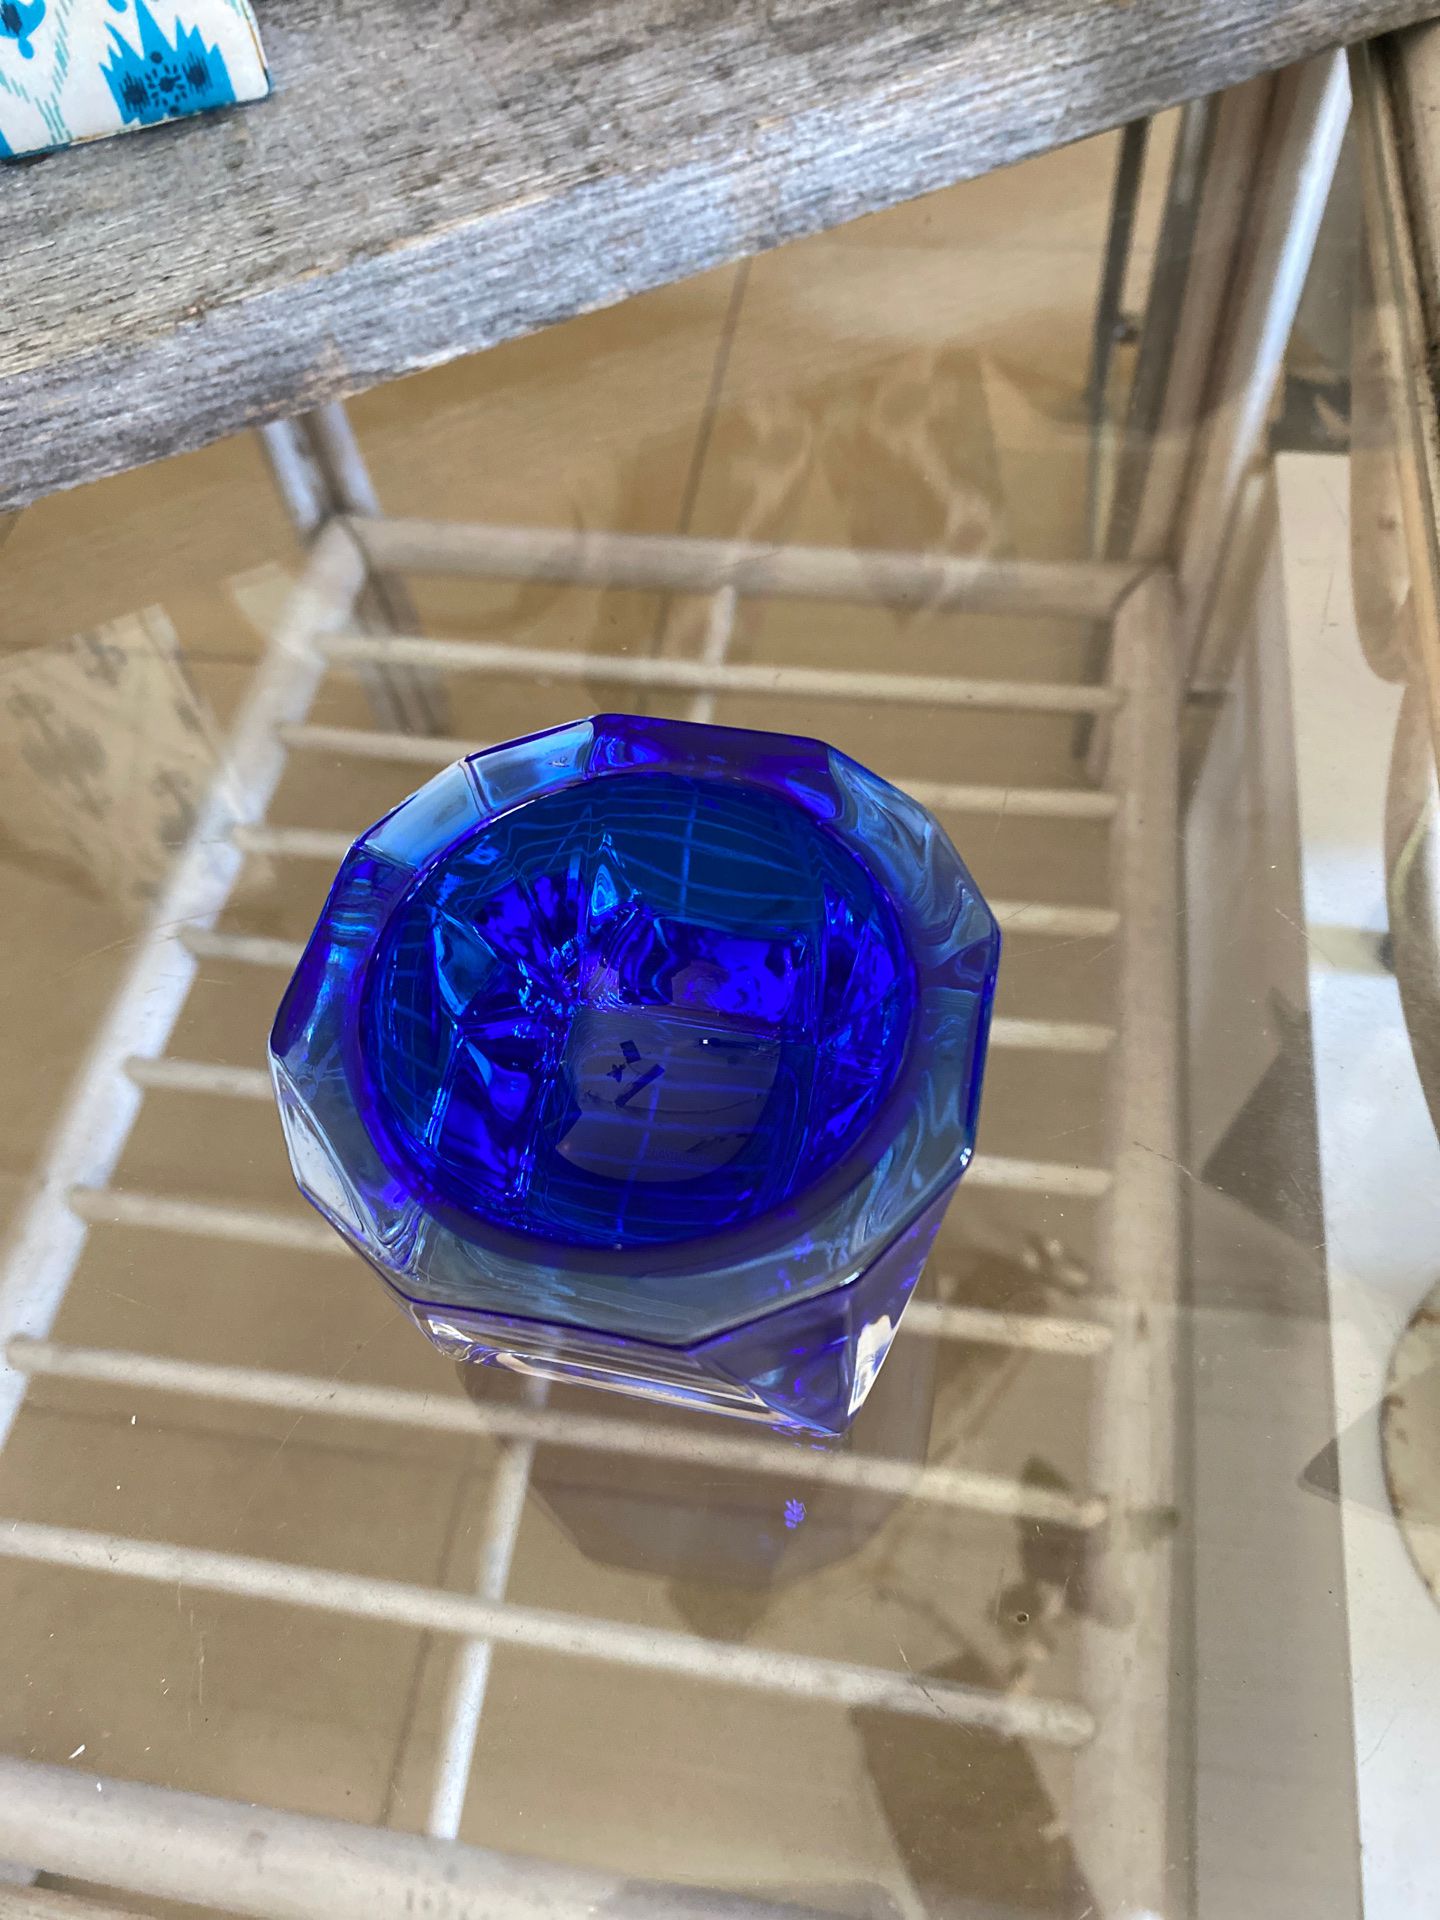 Cobalt blue small dish signed J.G.Durand,Small ashtray, glass, heavy, paperweight, home office, Father’s Day. 3 in.² 2 1/2 inches tall